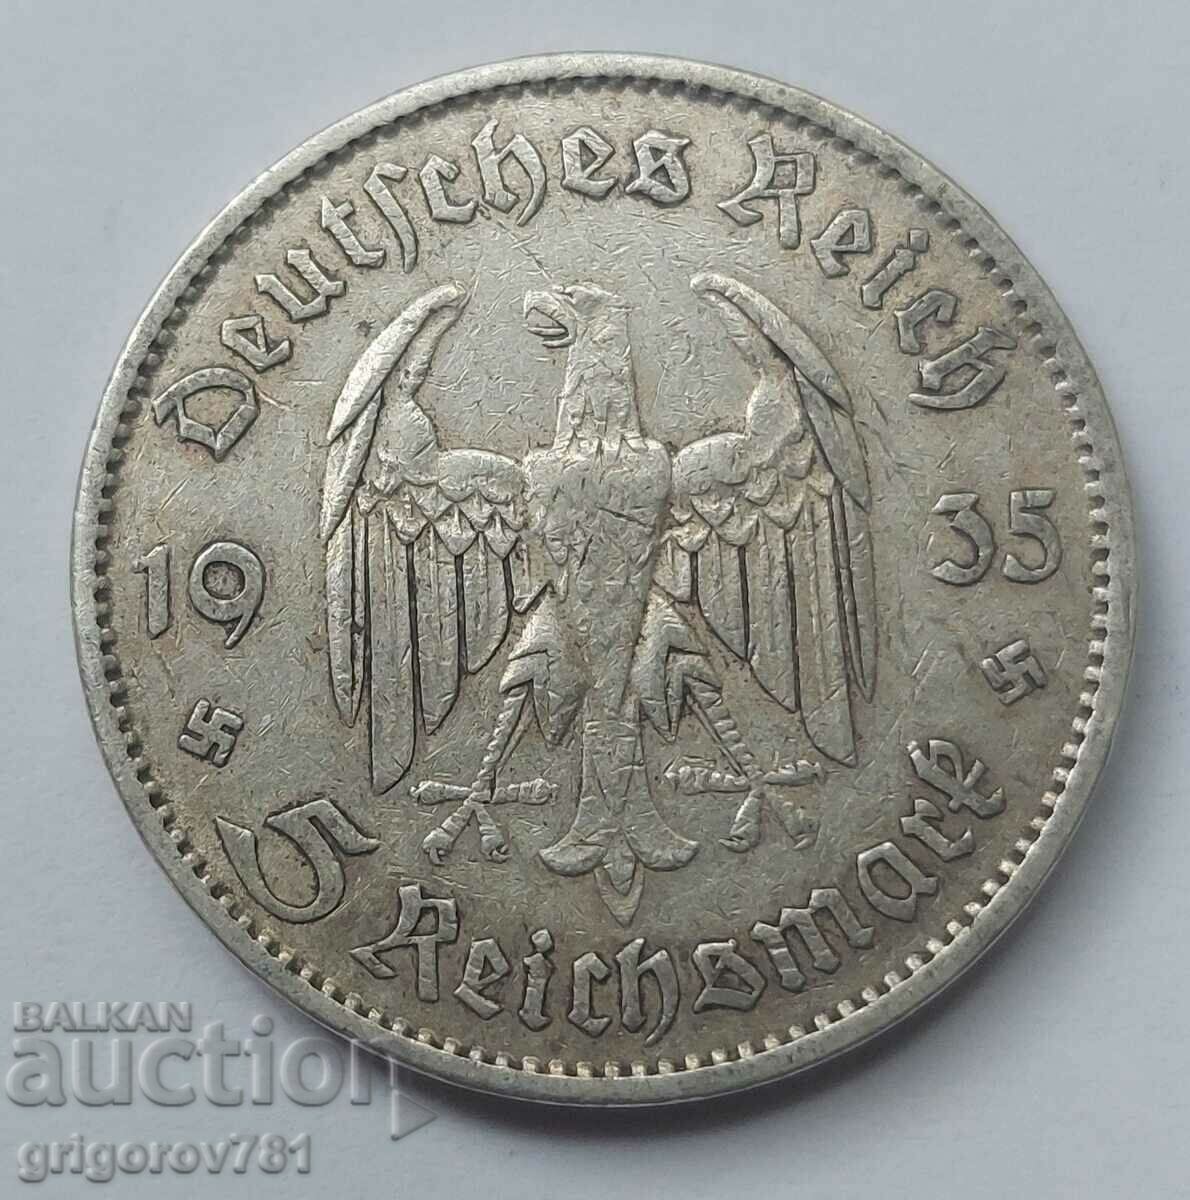 5 Mark Silver Germany 1935 A III Reich Silver Coin #13